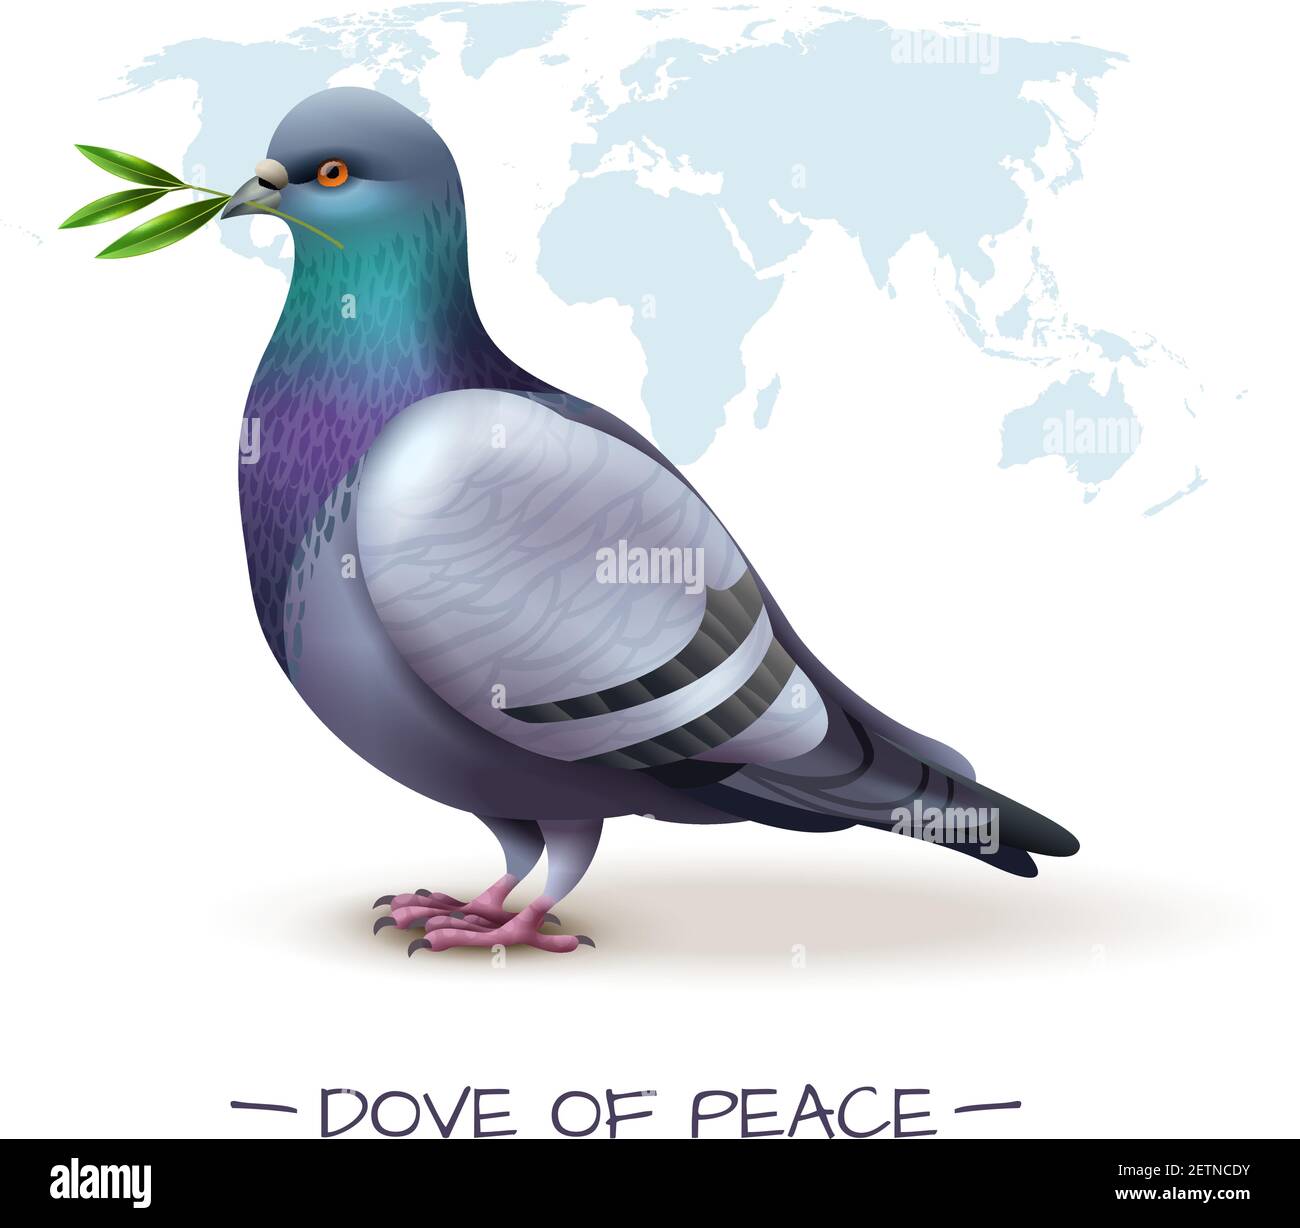 Bird background with image of pigeon holding branch with green leaves in front of world map vector illustration Stock Vector